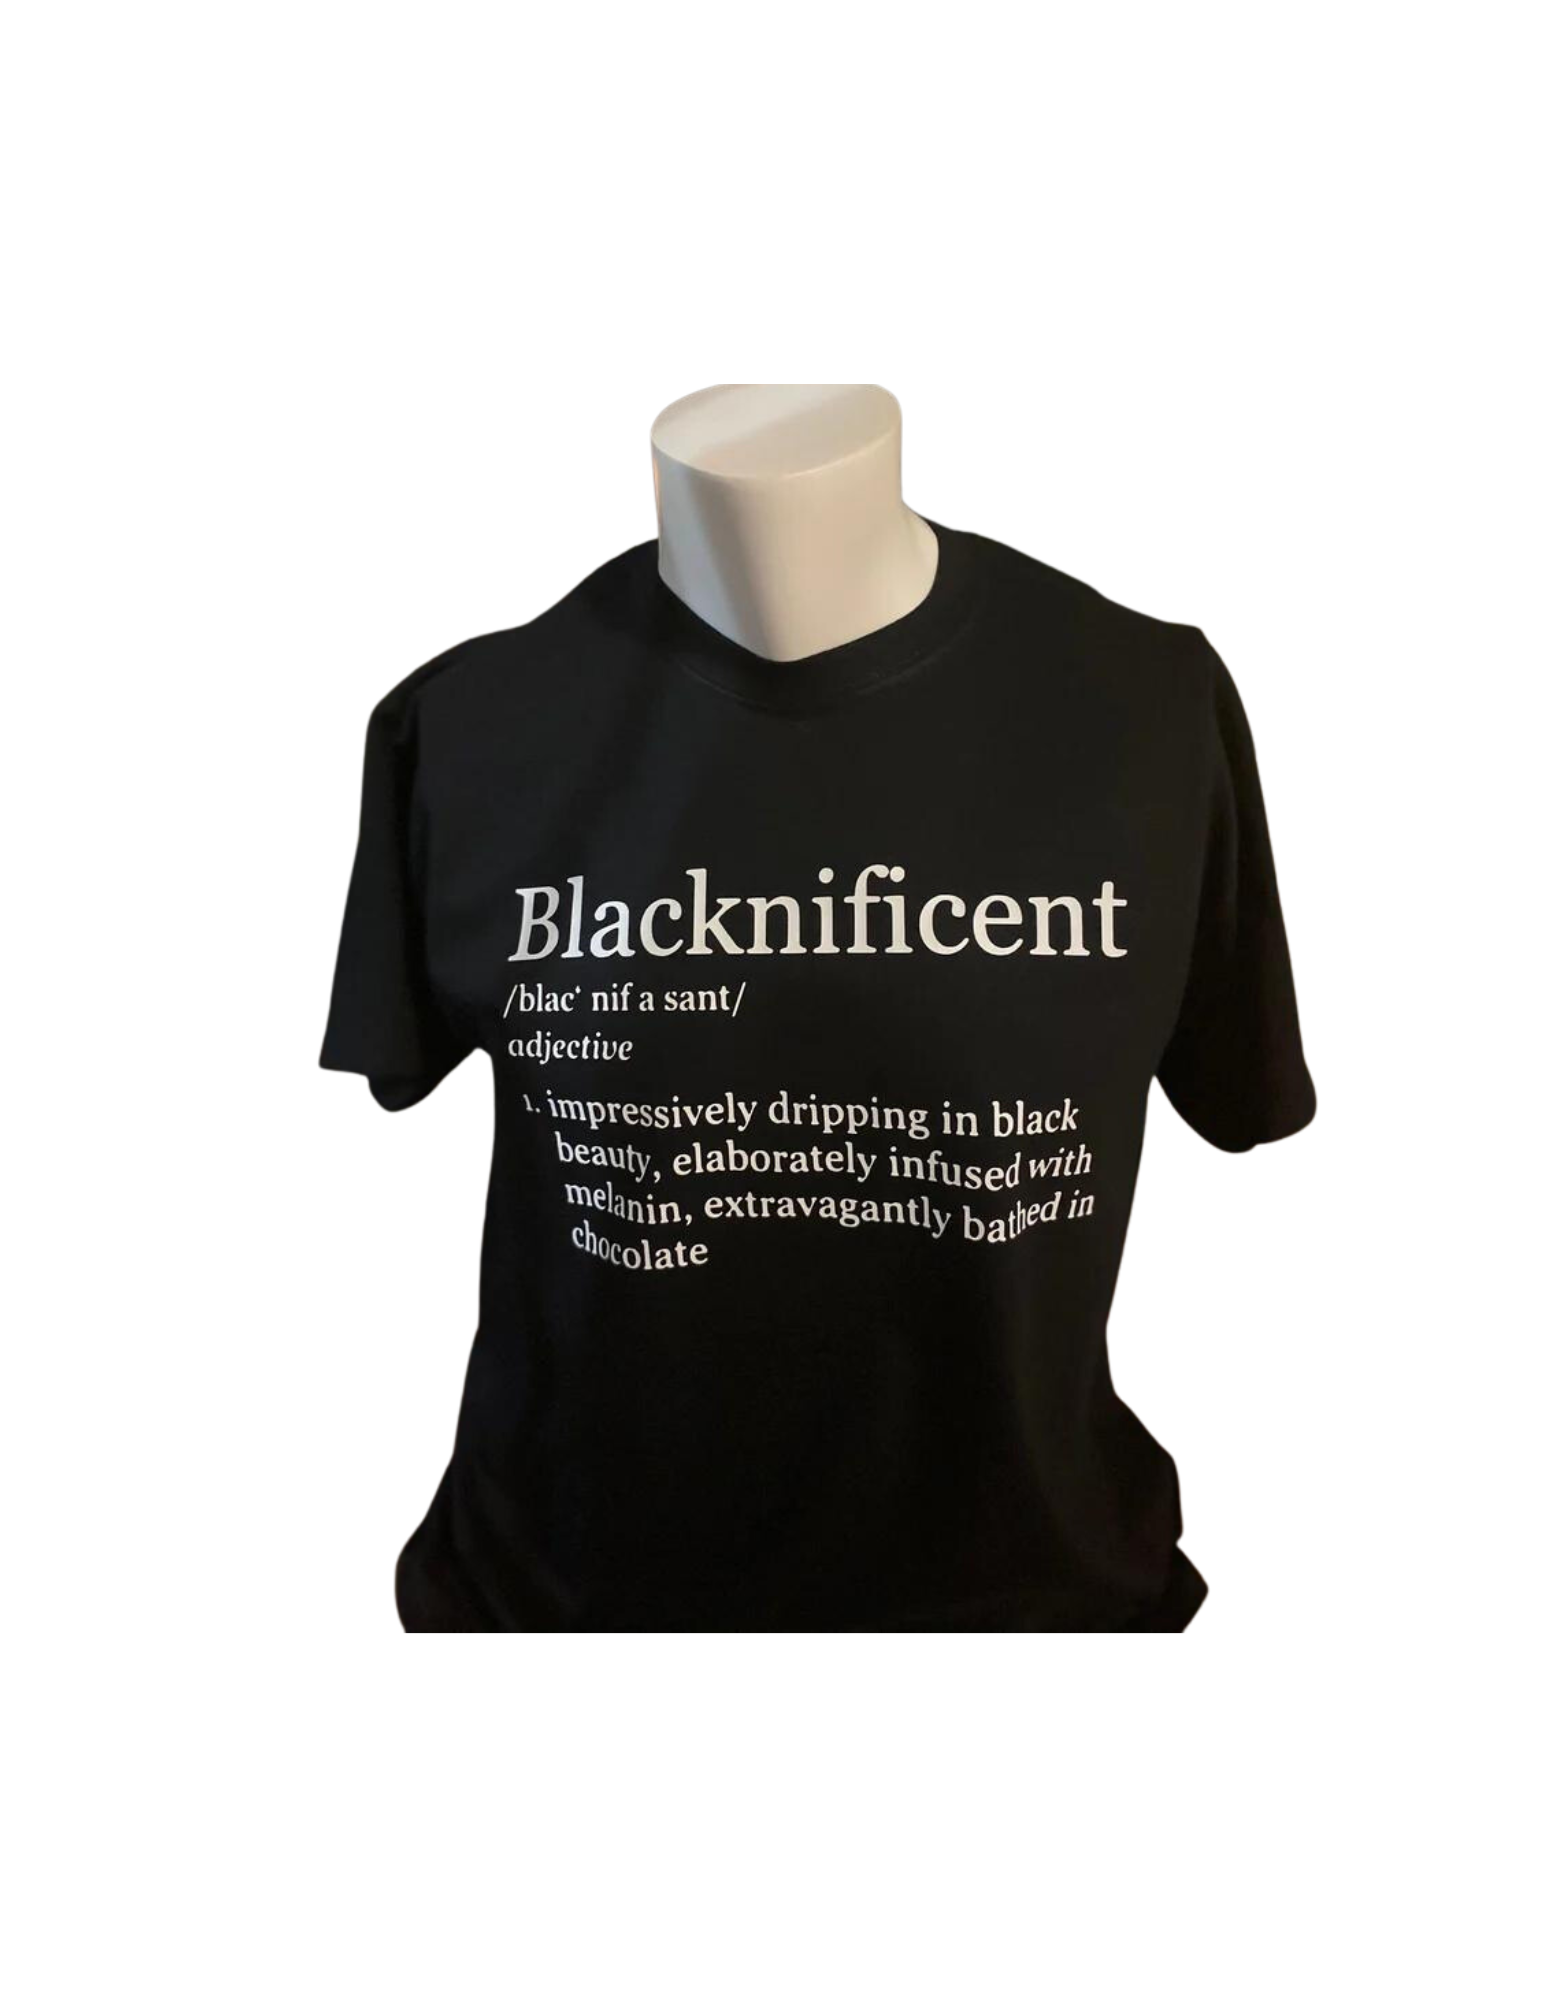 Blacknificent defined